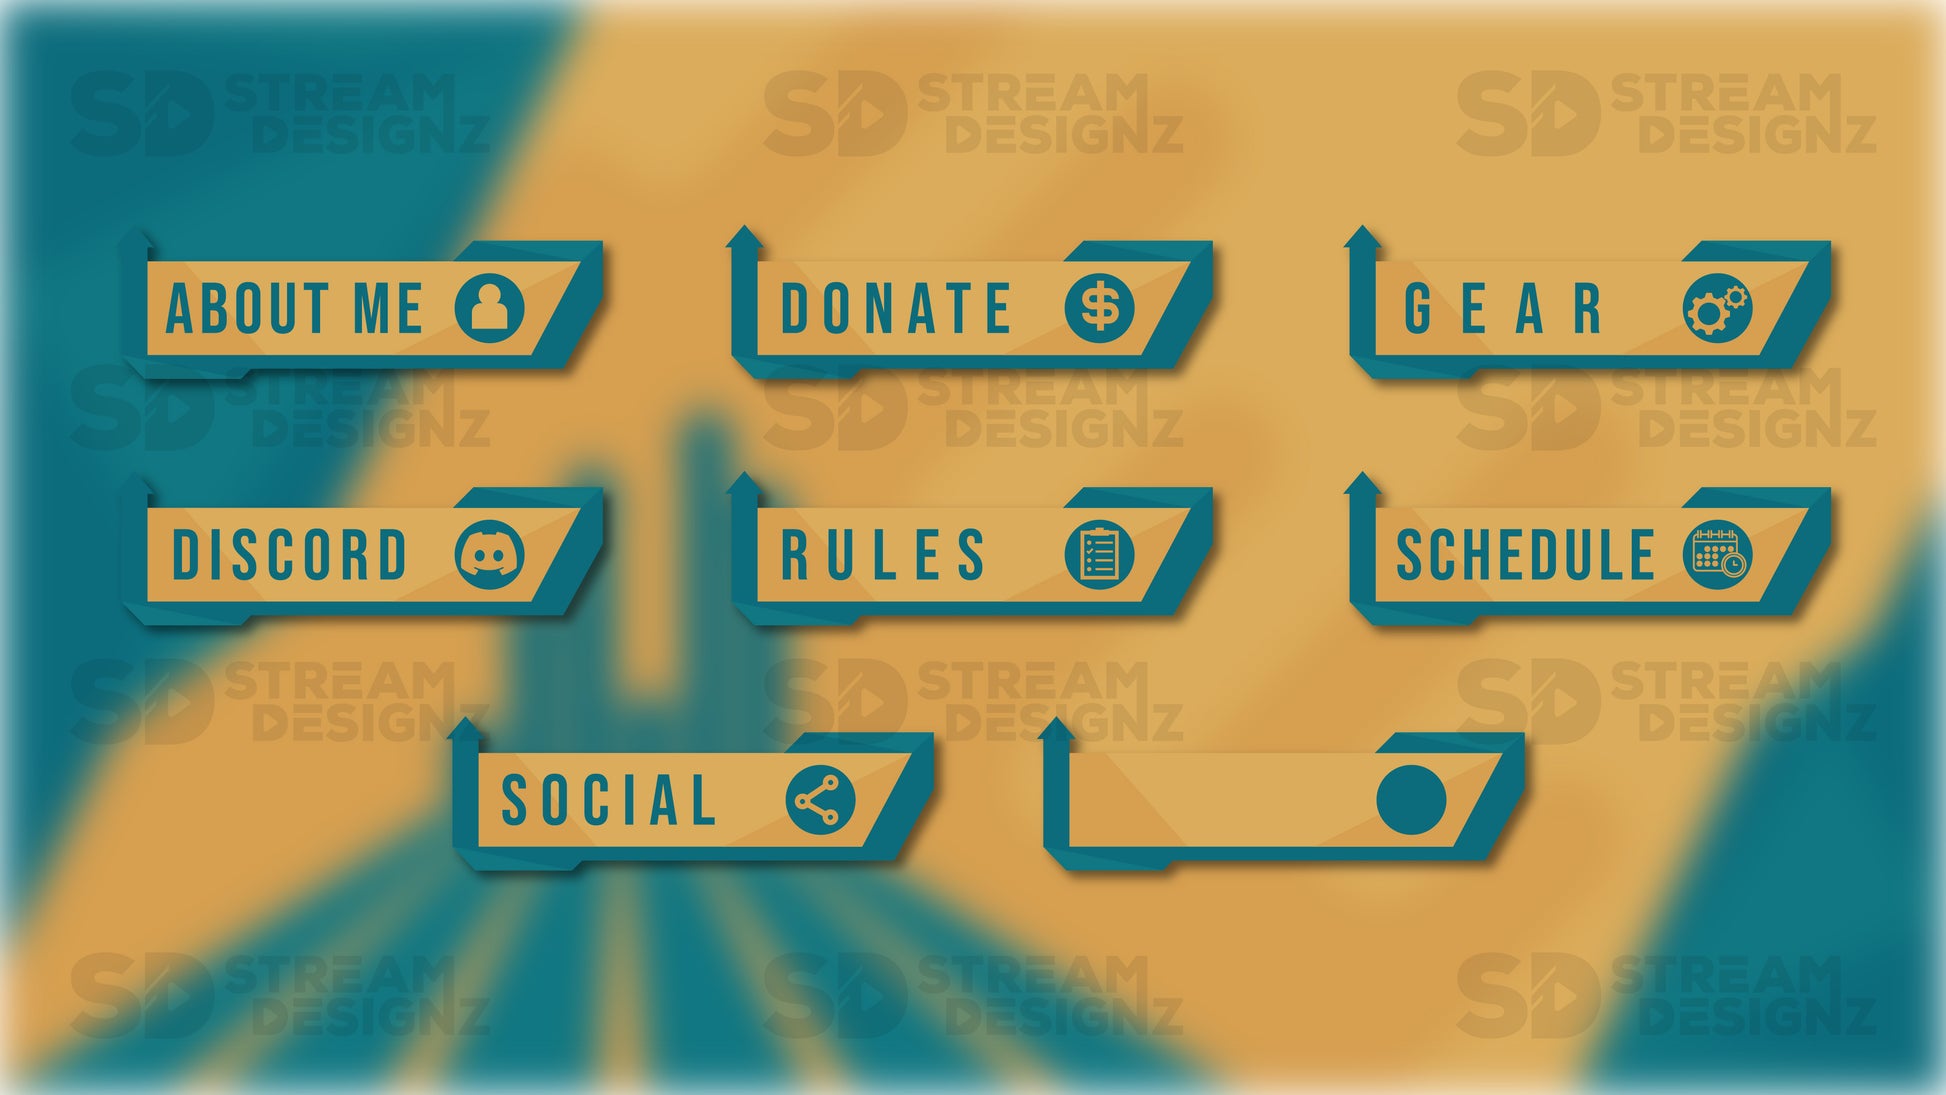 Twitch panels on the rise panels preview stream designz